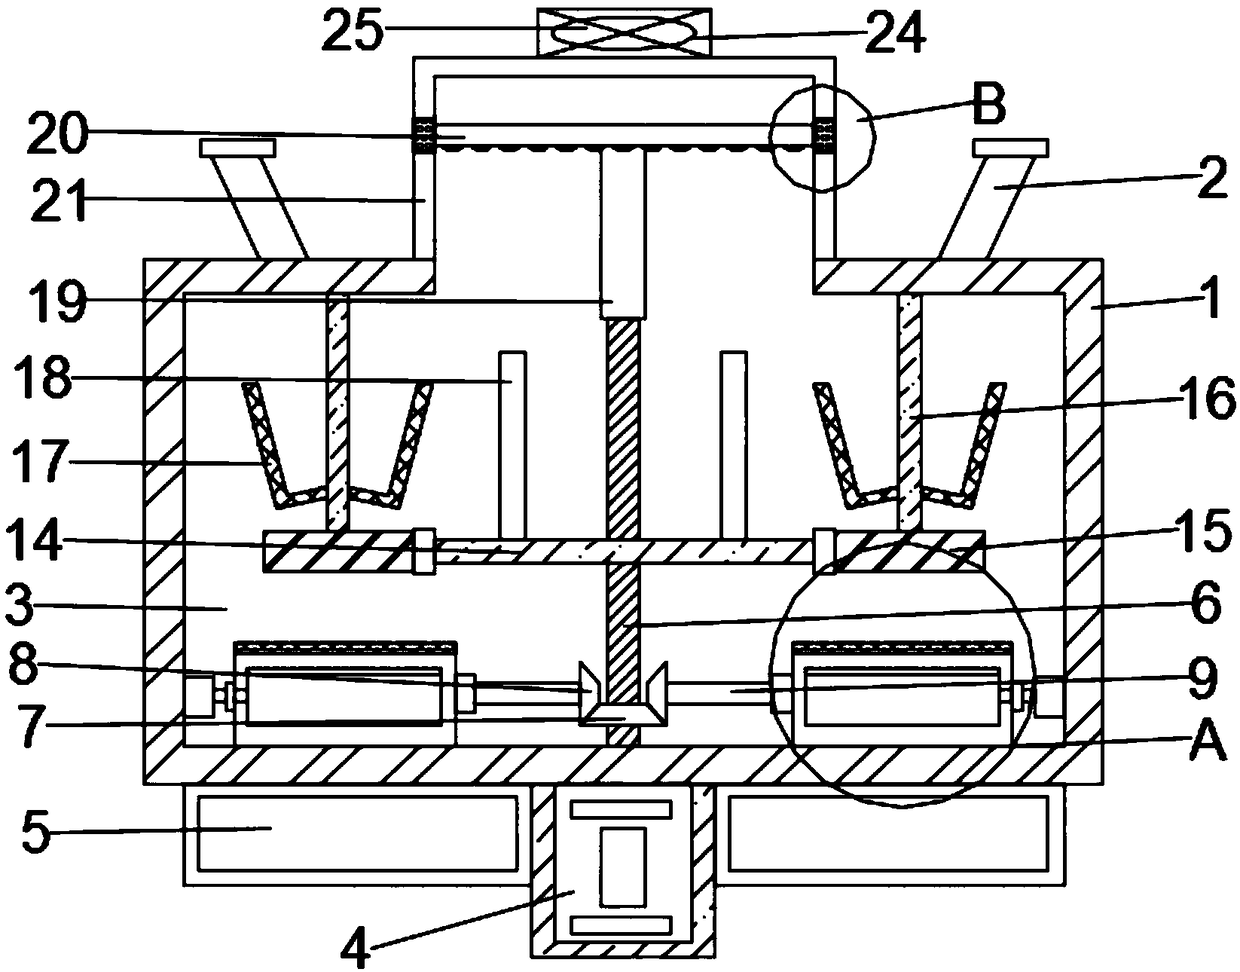 Smell volatilization type trapping equipment for insects in farmland